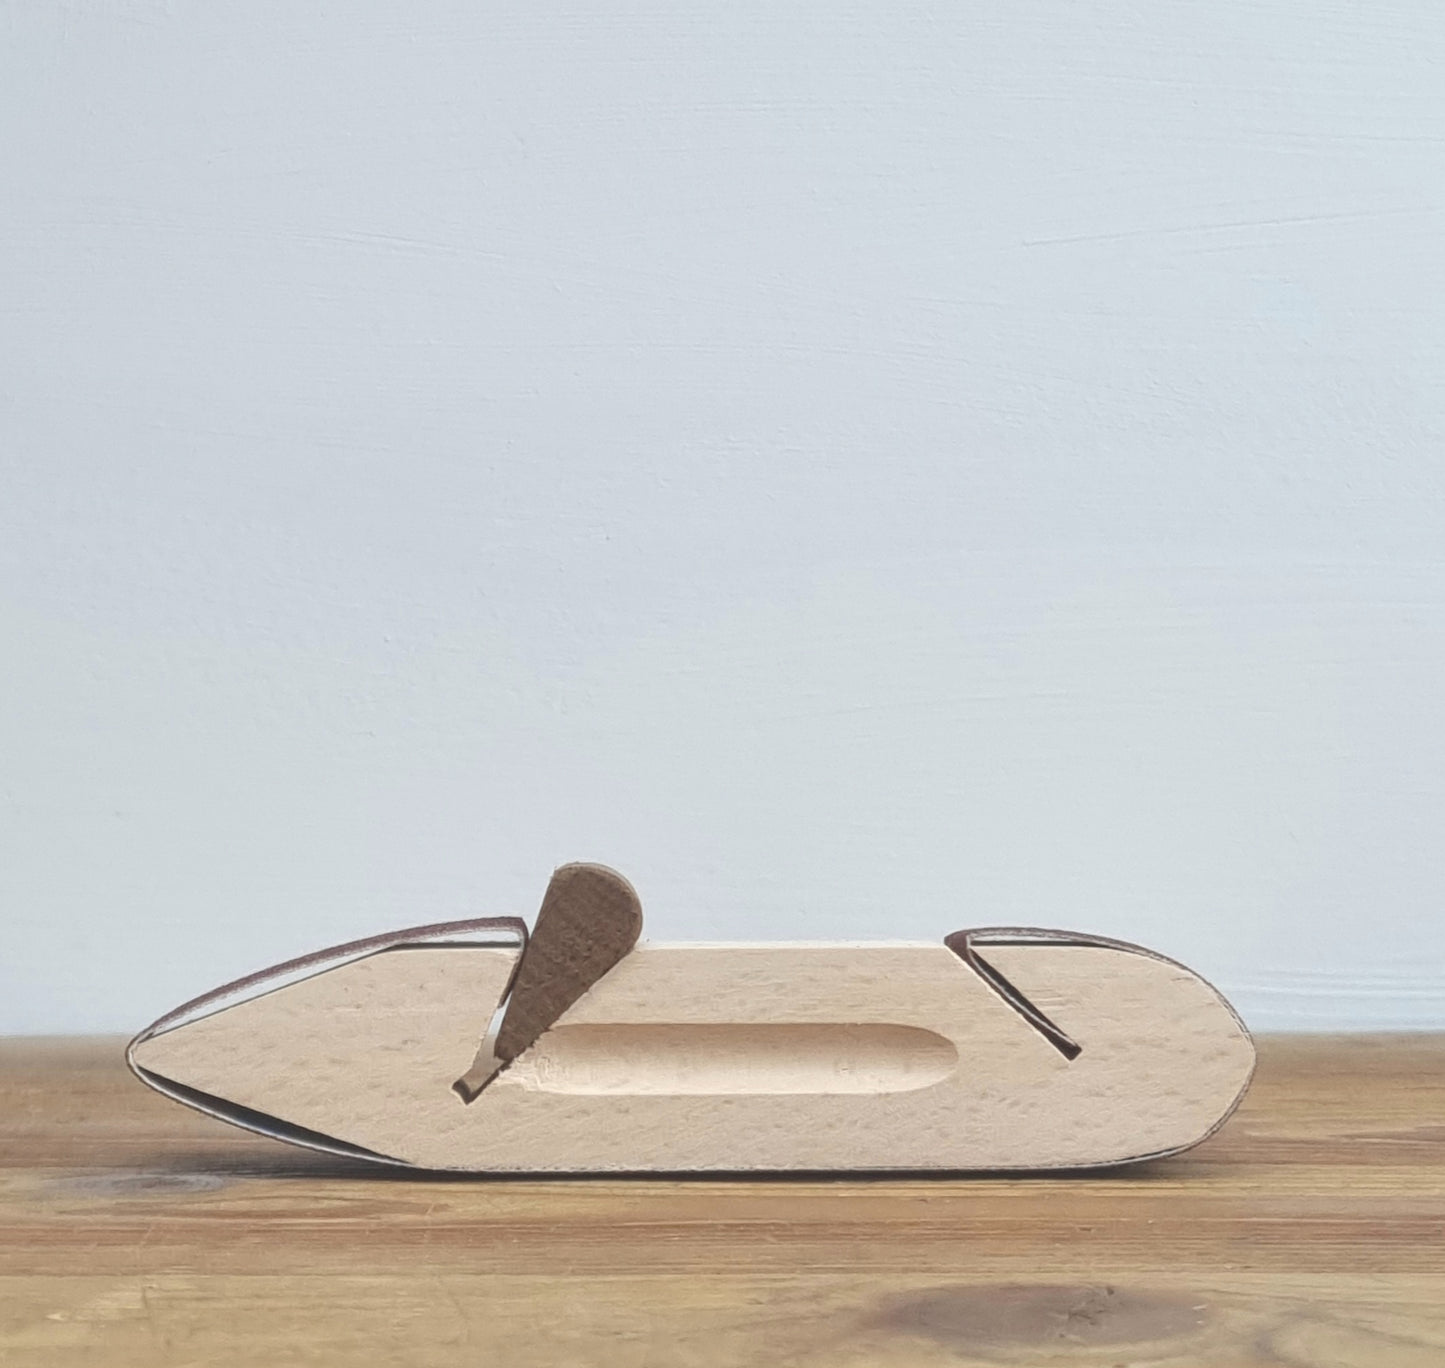 Sanding mouse